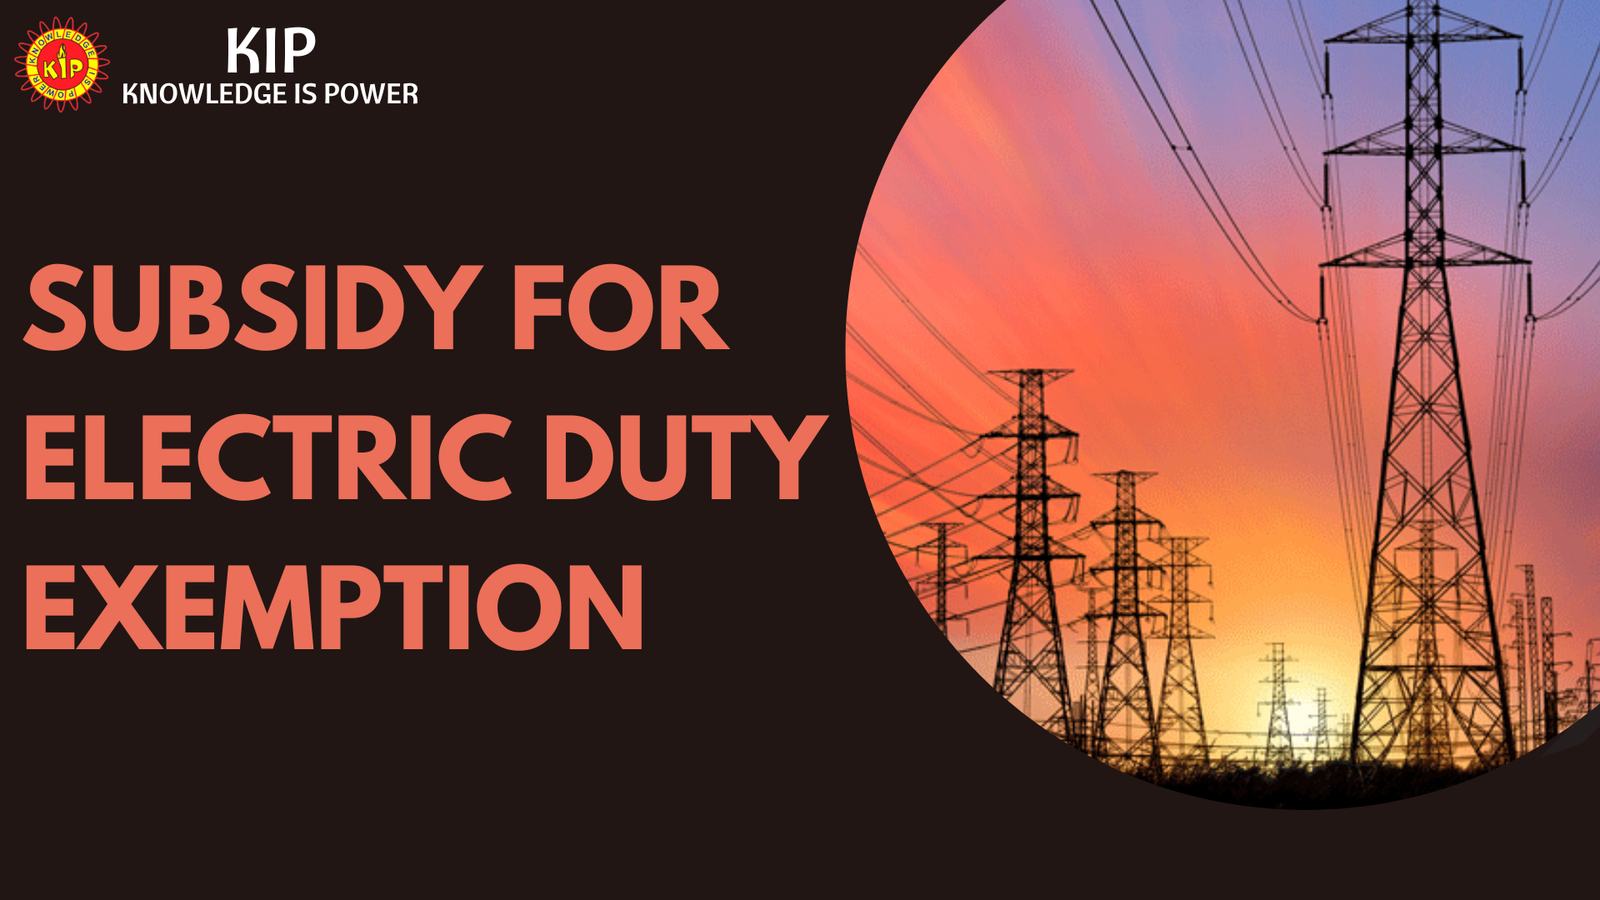 Electric duty exemption